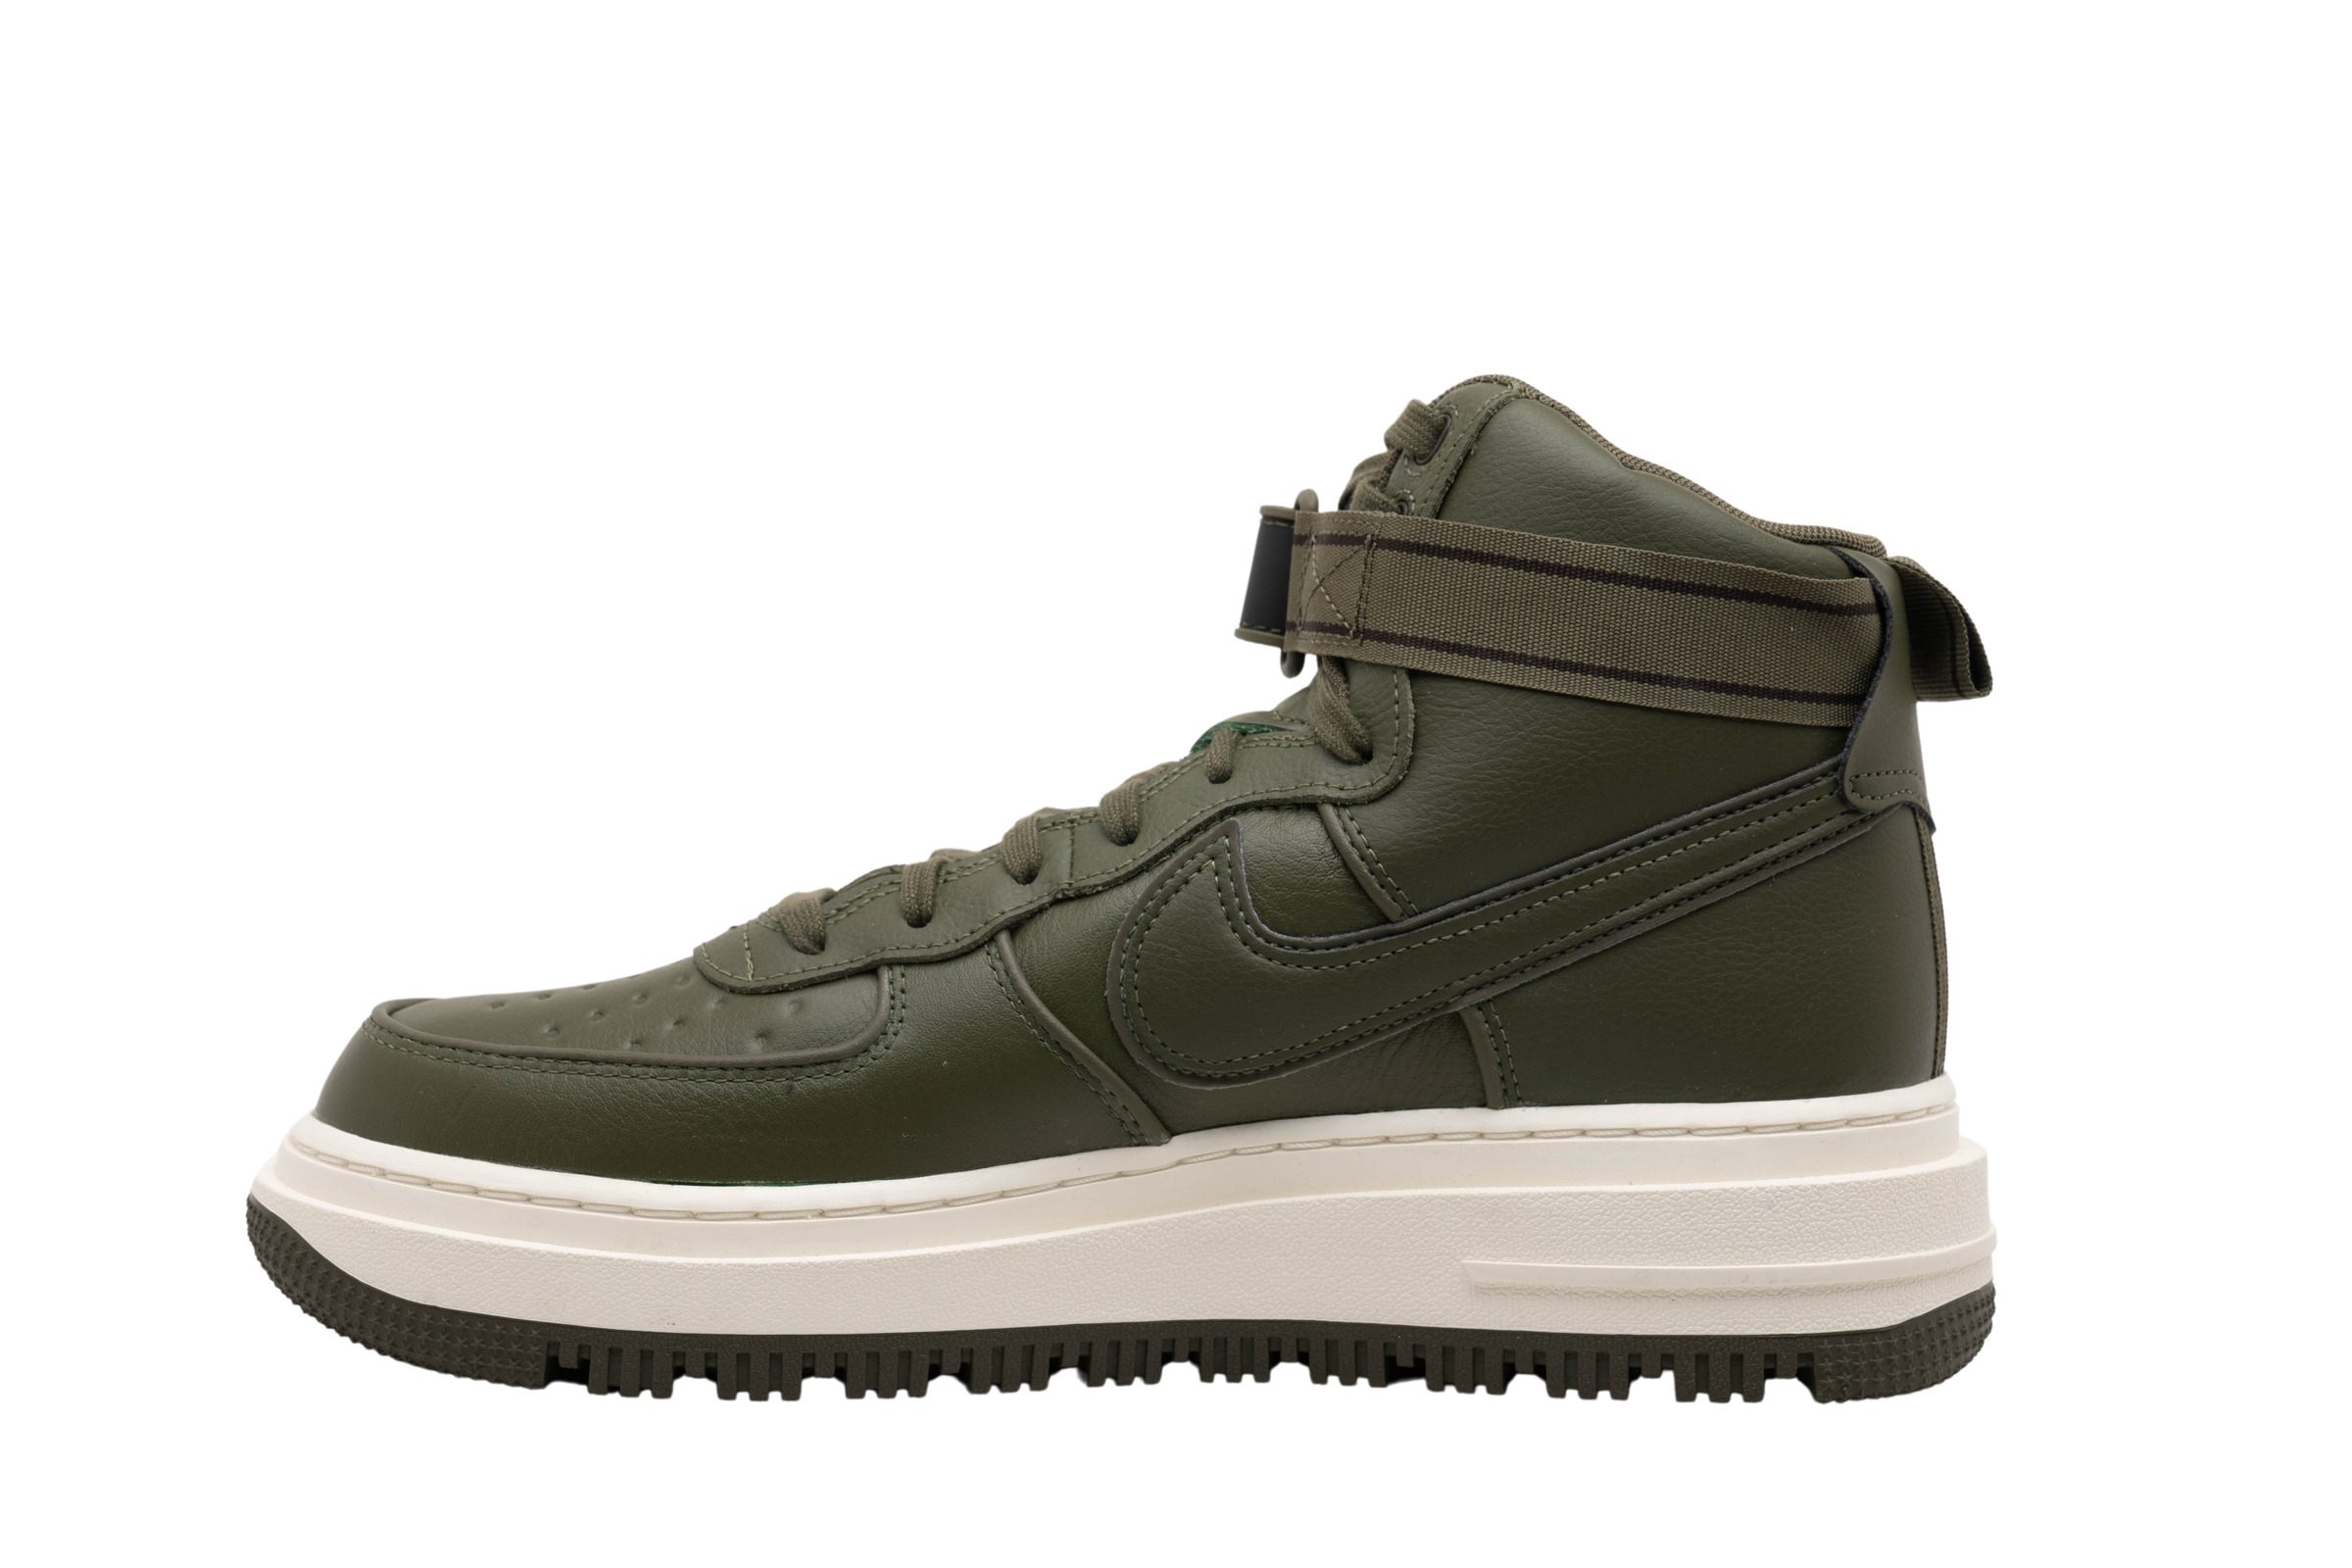 Nike Air Force 1 High Gore-Tex 2020 Olive for Sale | Authenticity 